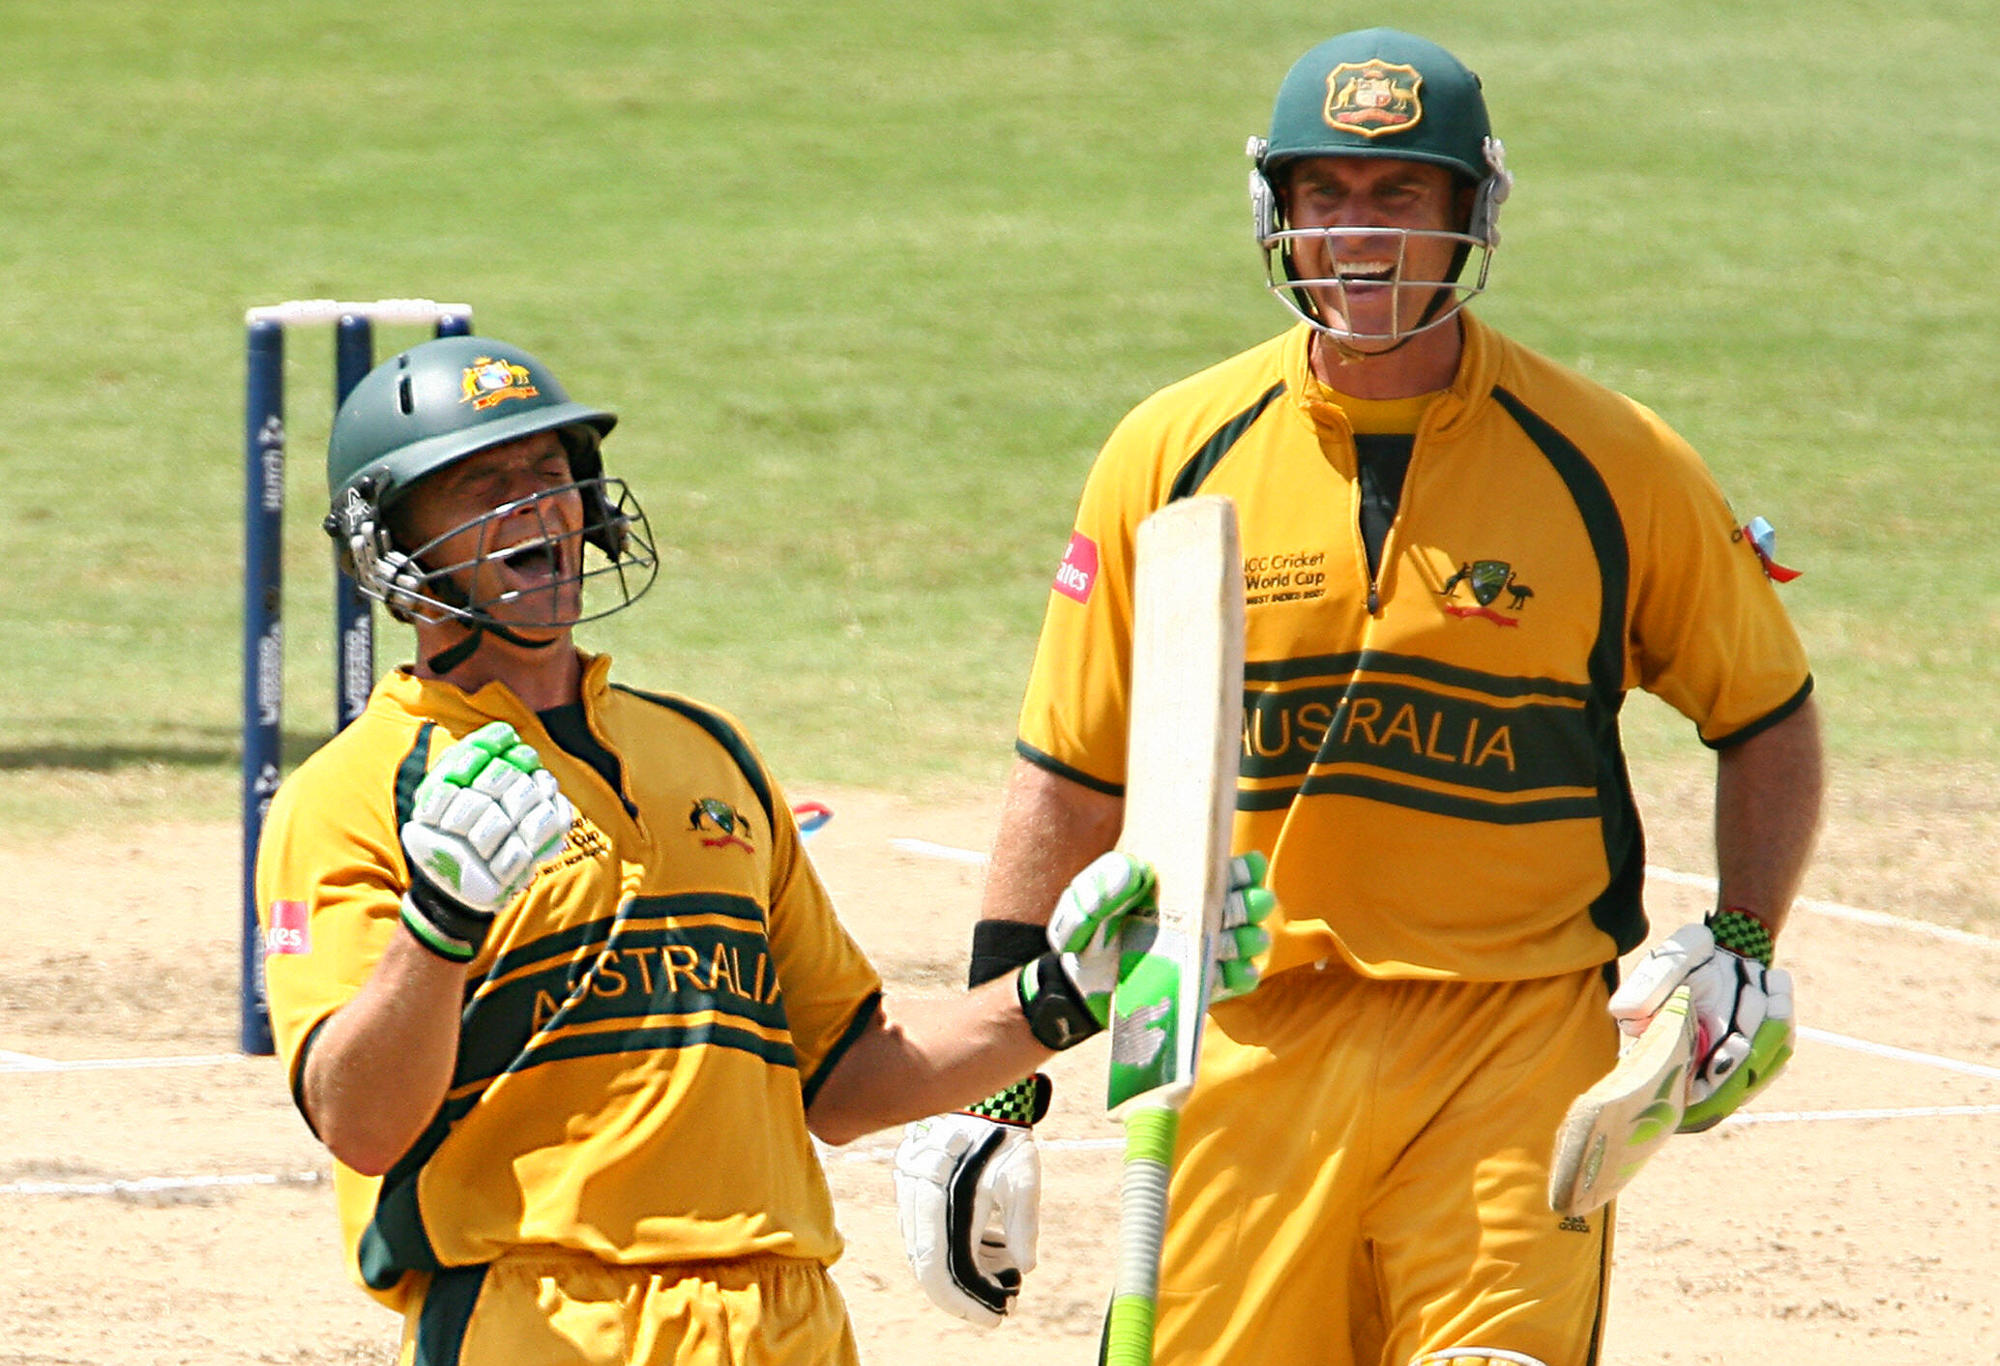 Adam Gilchrist celebrates his century in the 2007 Cricket World Cup final